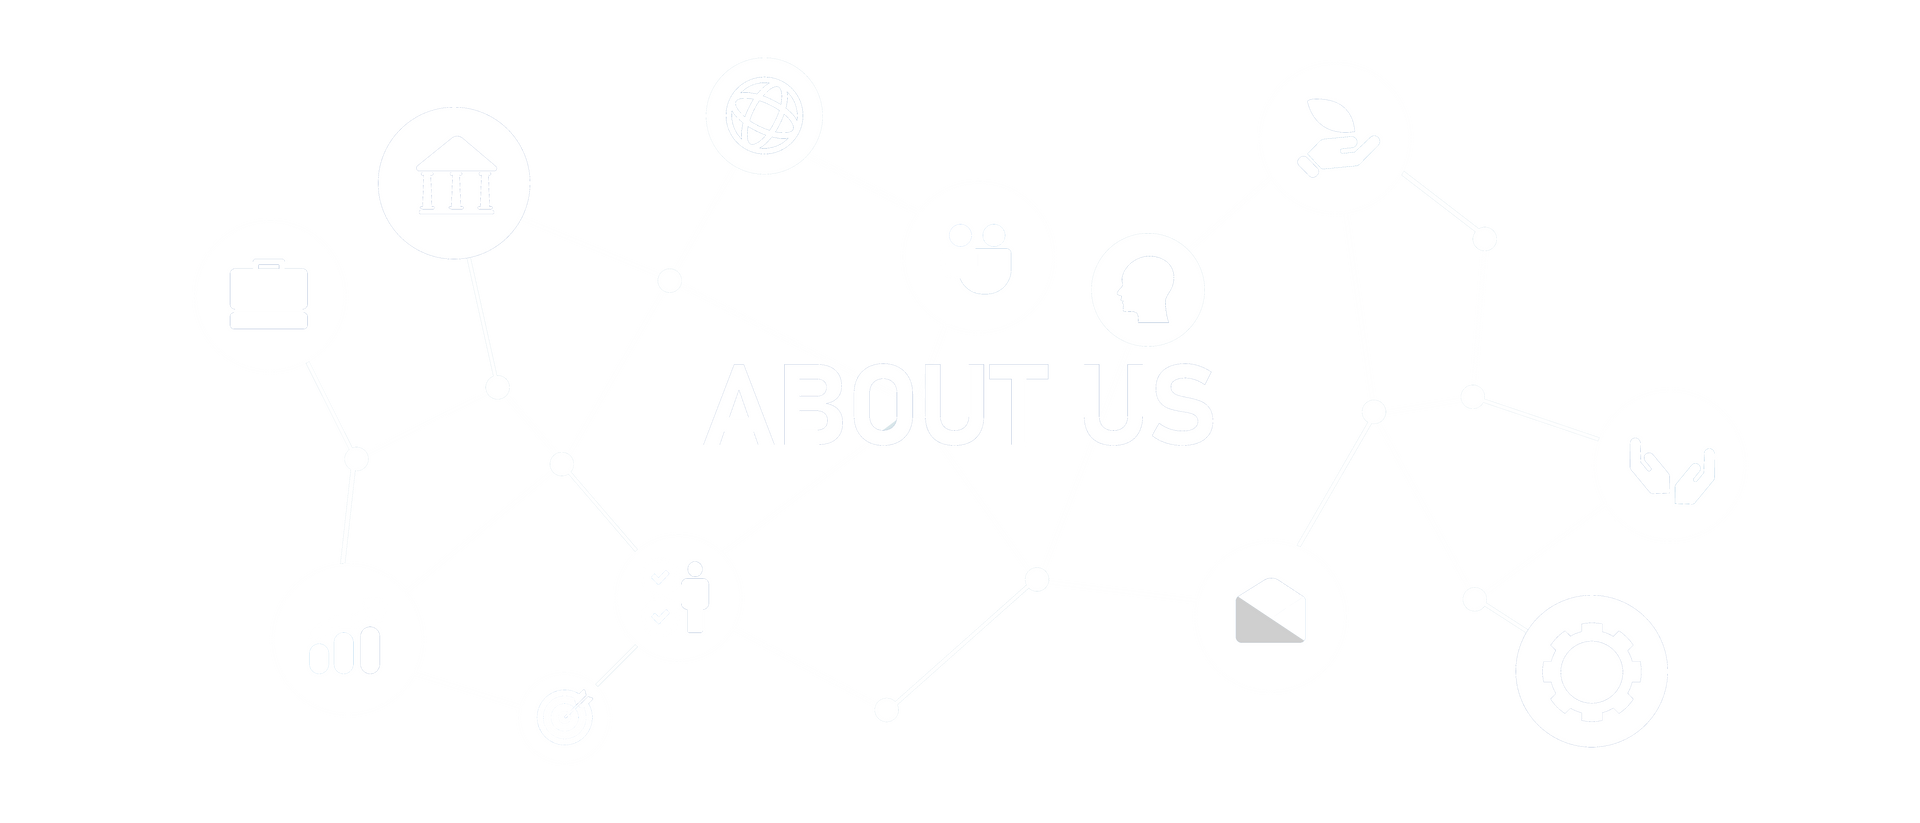 This image is text that says about us with graphics connecting different digital services together.